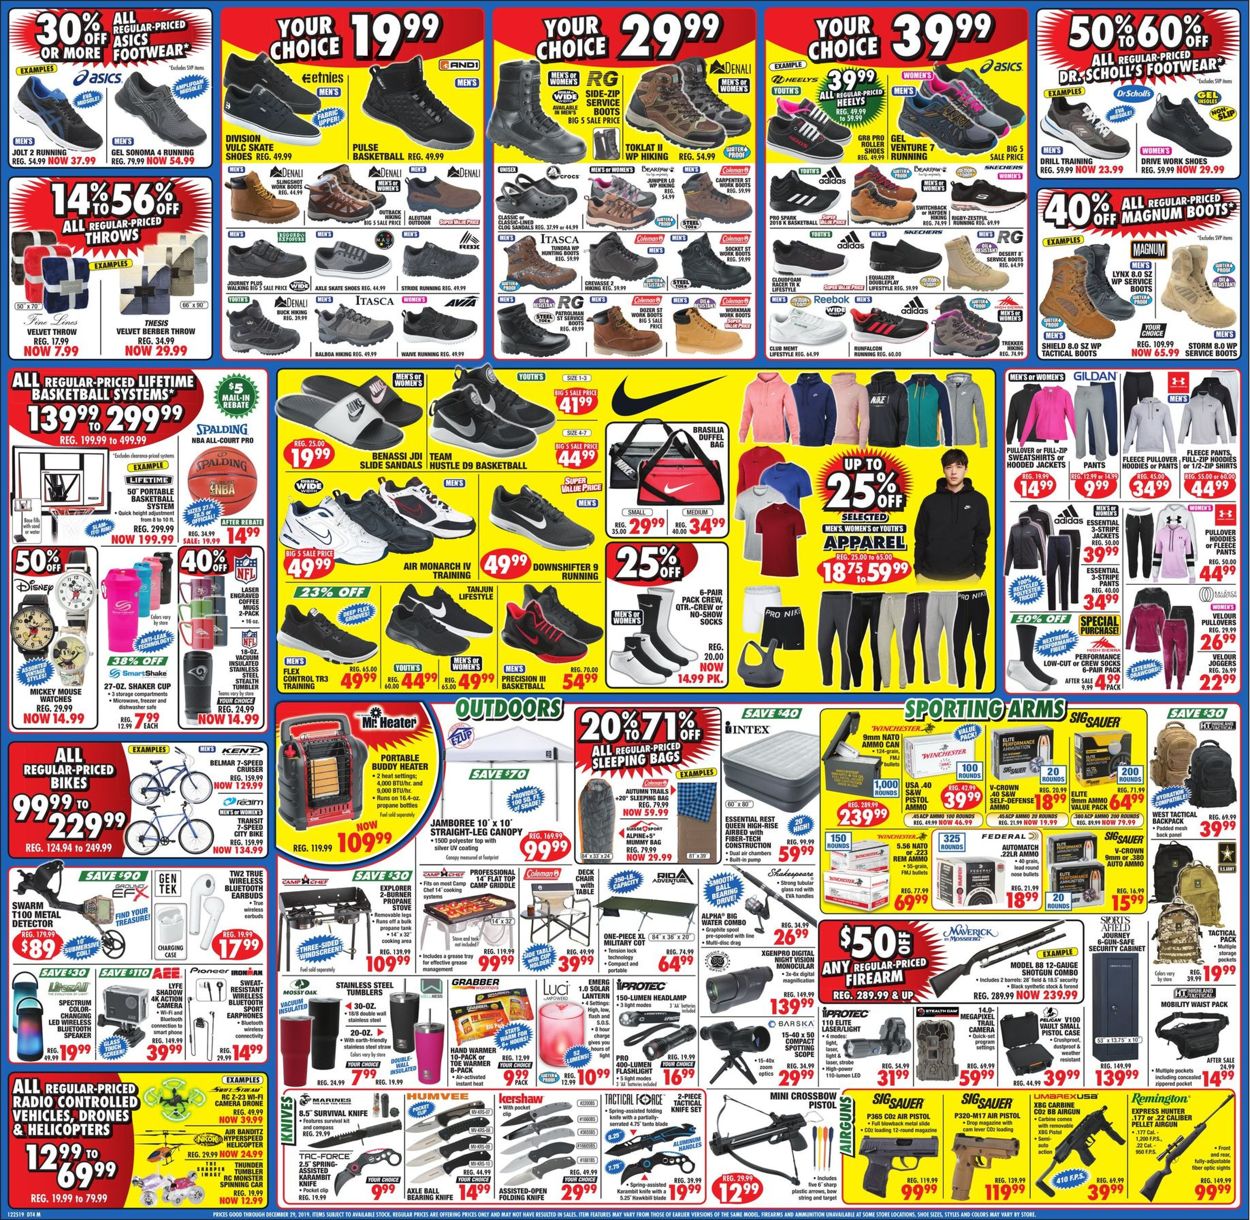 Catalogue Big 5 - New Year's Ad 2019/2020 from 12/25/2019